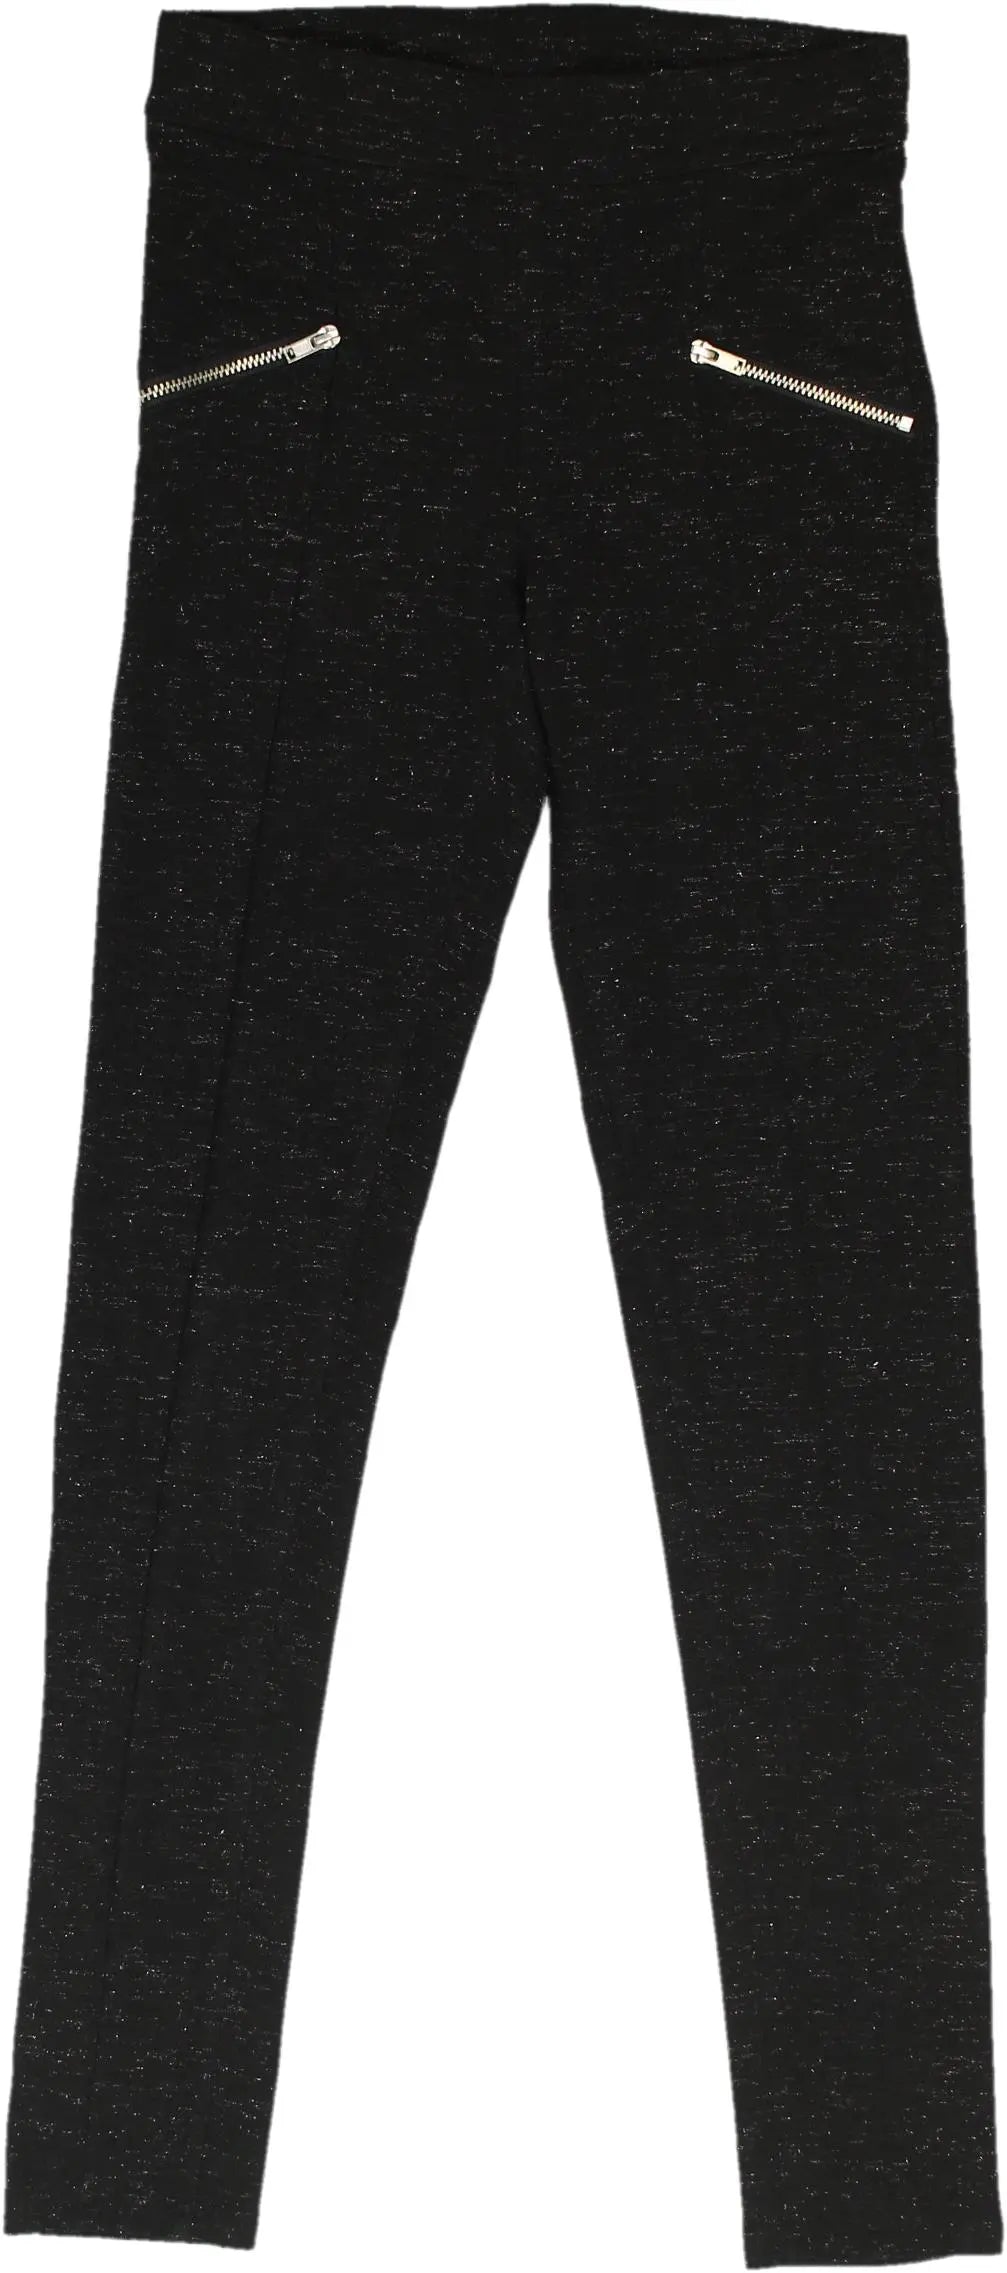 H&M - Black Legging with Glitter- ThriftTale.com - Vintage and second handclothing